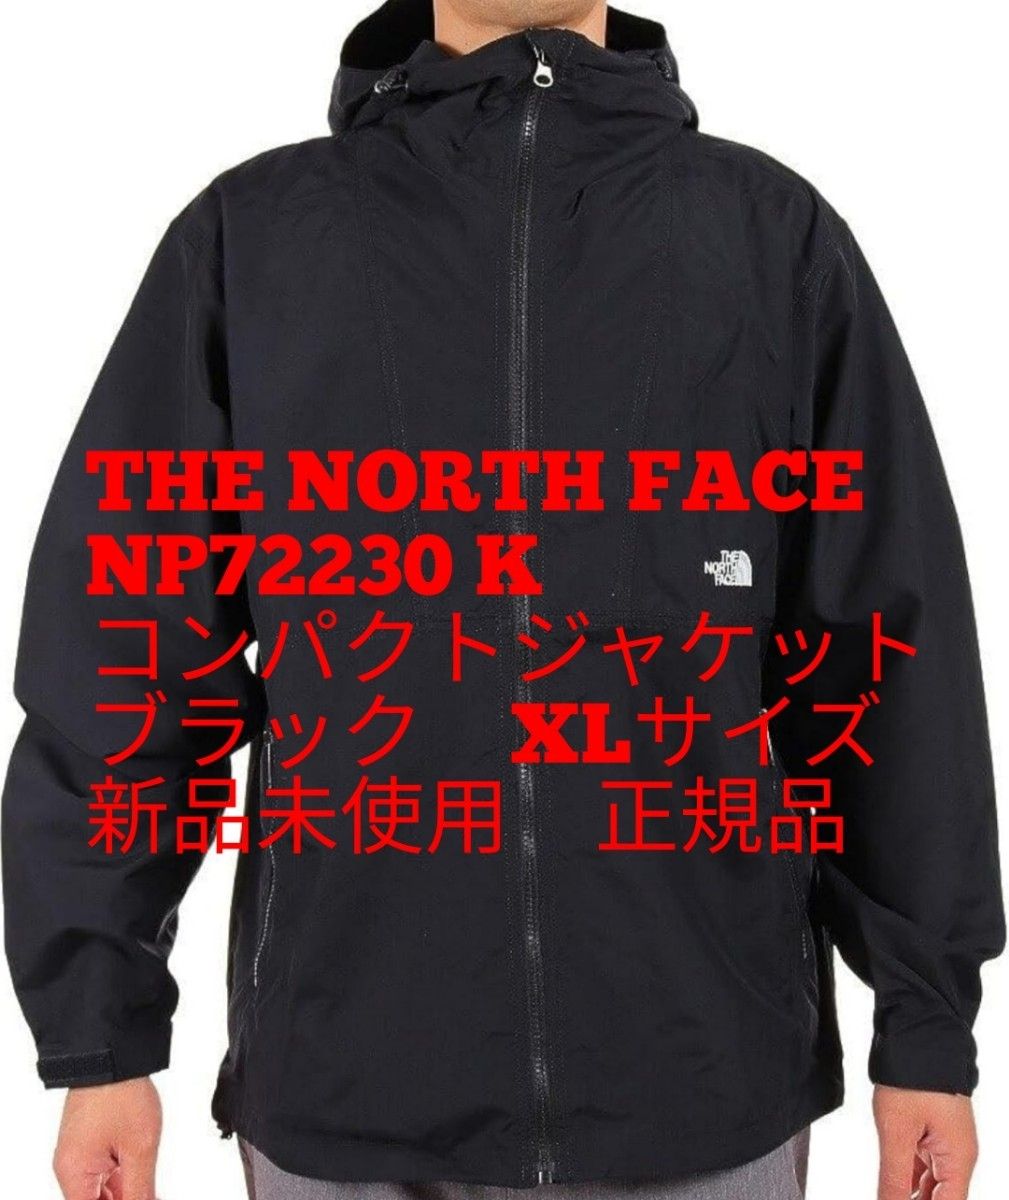 NP72230 K 新品 THE NORTH FACE コンパクトジャケット